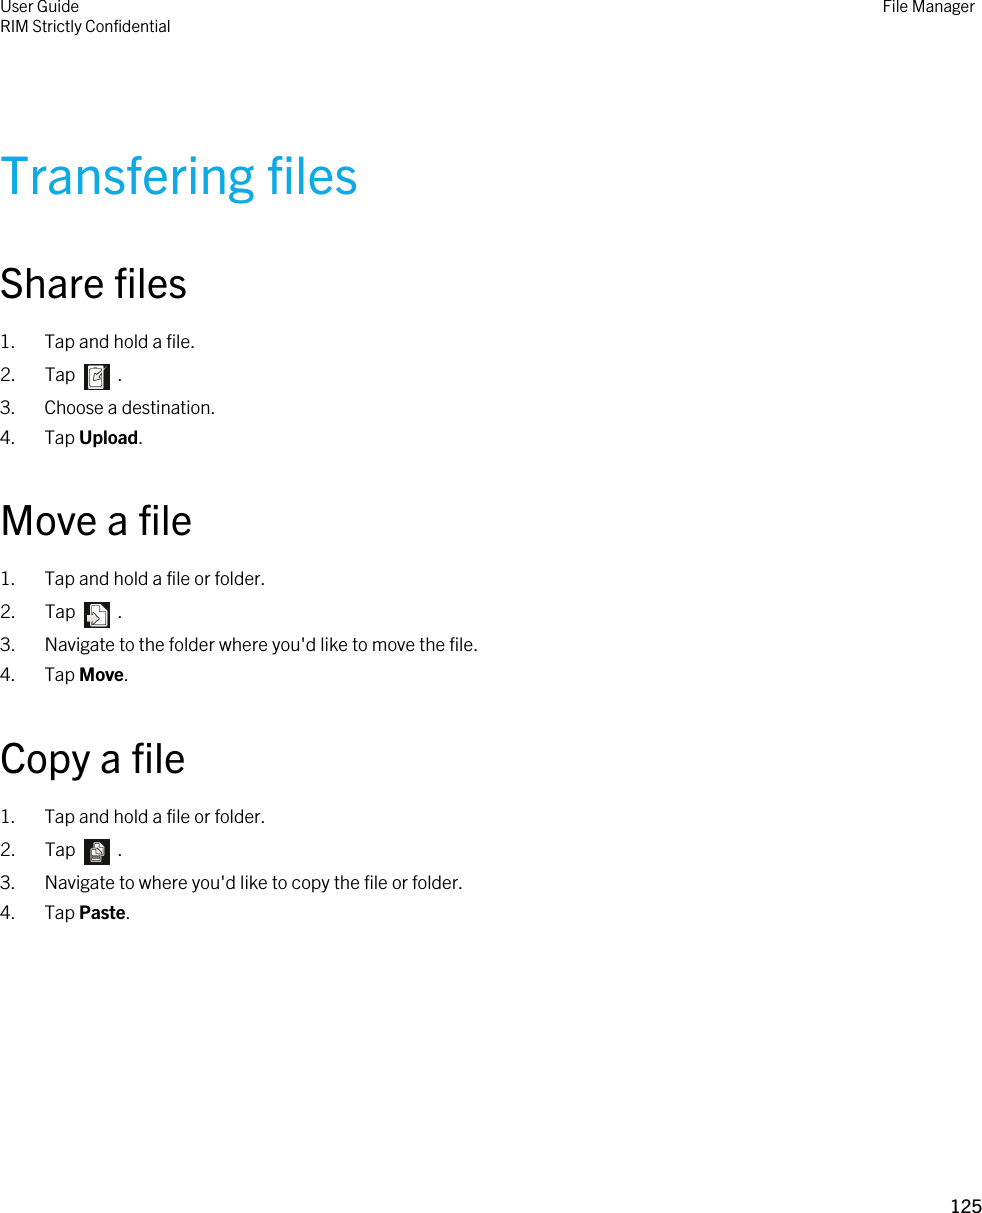 Transfering filesShare files1. Tap and hold a file.2.  Tap    .3. Choose a destination.4. Tap Upload.Move a file1. Tap and hold a file or folder.2.  Tap    .3. Navigate to the folder where you&apos;d like to move the file.4. Tap Move.Copy a file1. Tap and hold a file or folder.2.  Tap    .3. Navigate to where you&apos;d like to copy the file or folder.4. Tap Paste.User GuideRIM Strictly ConfidentialFile Manager125 